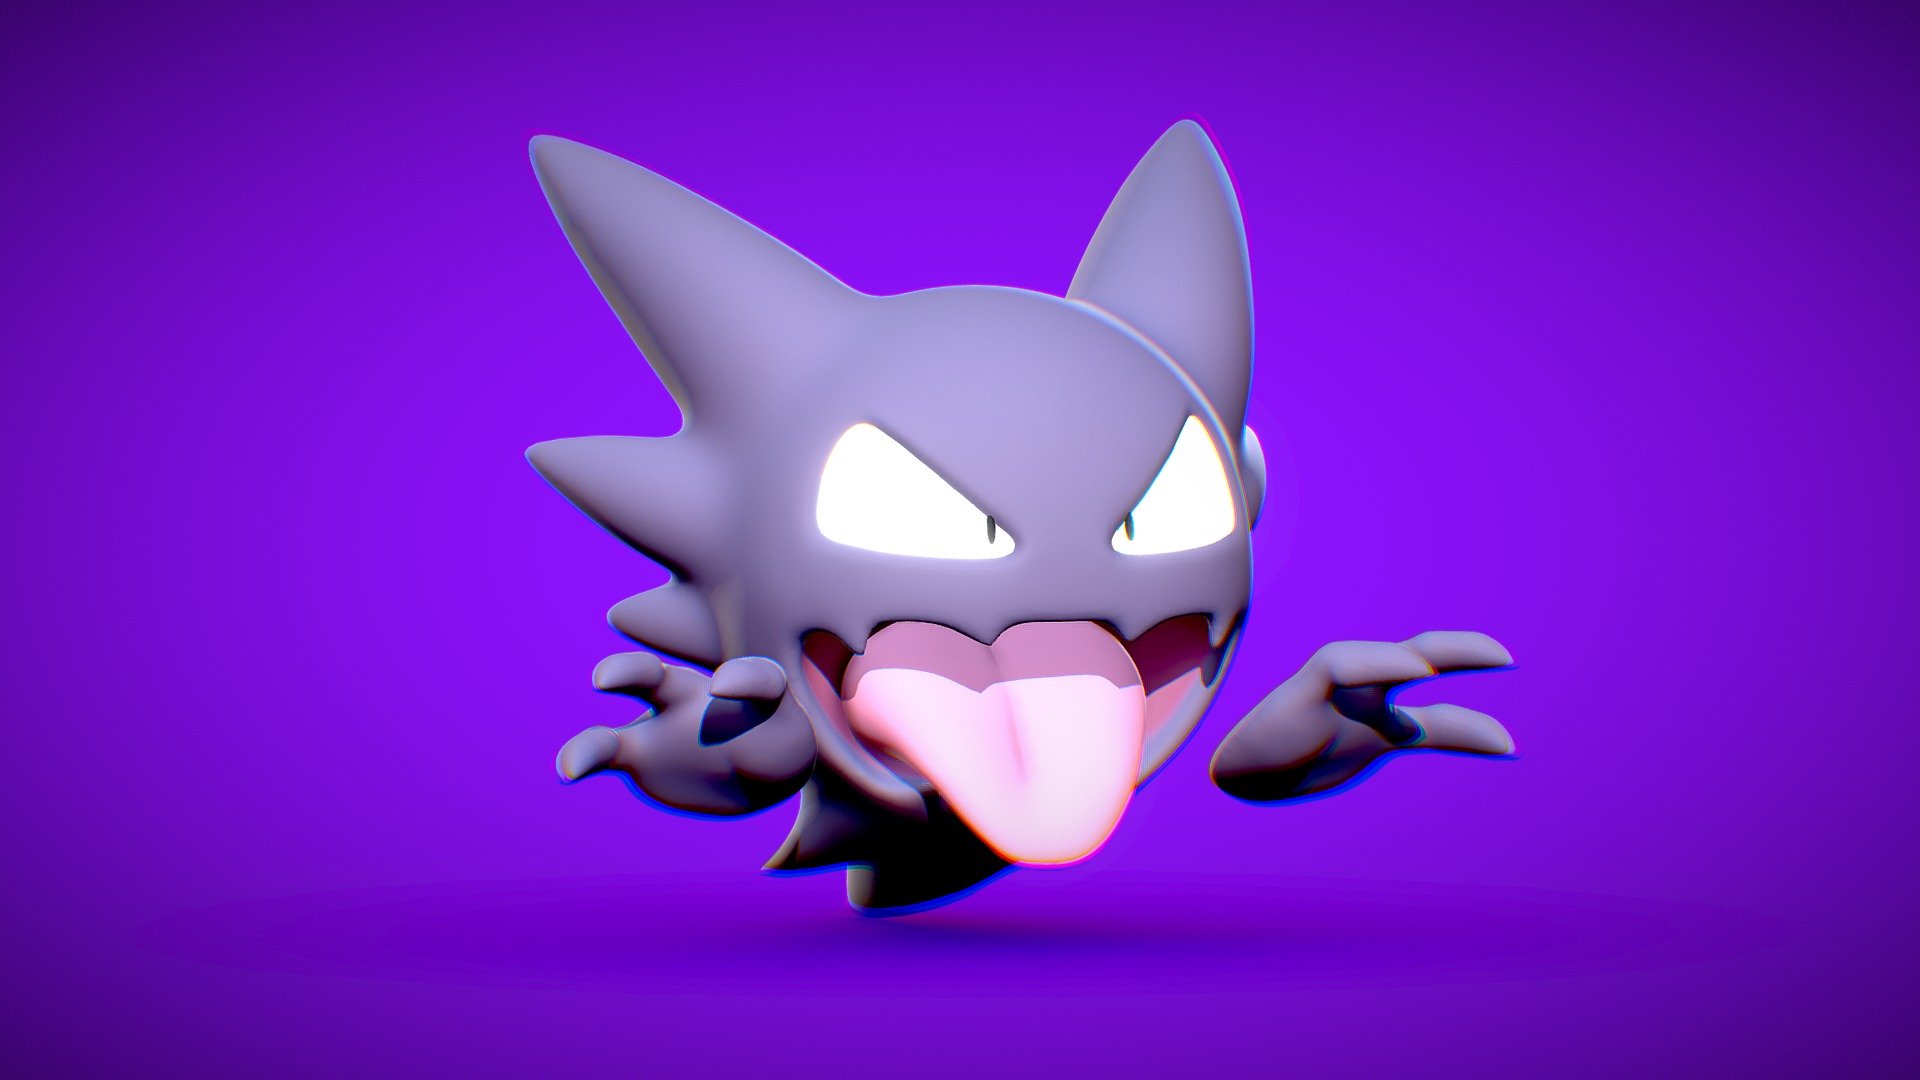 Scary Haunter Detailed Model made from scratch. Can be printed with good resolution in 6 inches ( 15cm).

Render images:
https://www.instagram.com/p/CbQpcsVpQWn/

Haunter in Blender 3.0 - Timelapse:
https://youtu.be/Rp6vfZOr65c - Scary Haunter 3D print model - Buy Royalty Free 3D model by LessaB3D 3d model